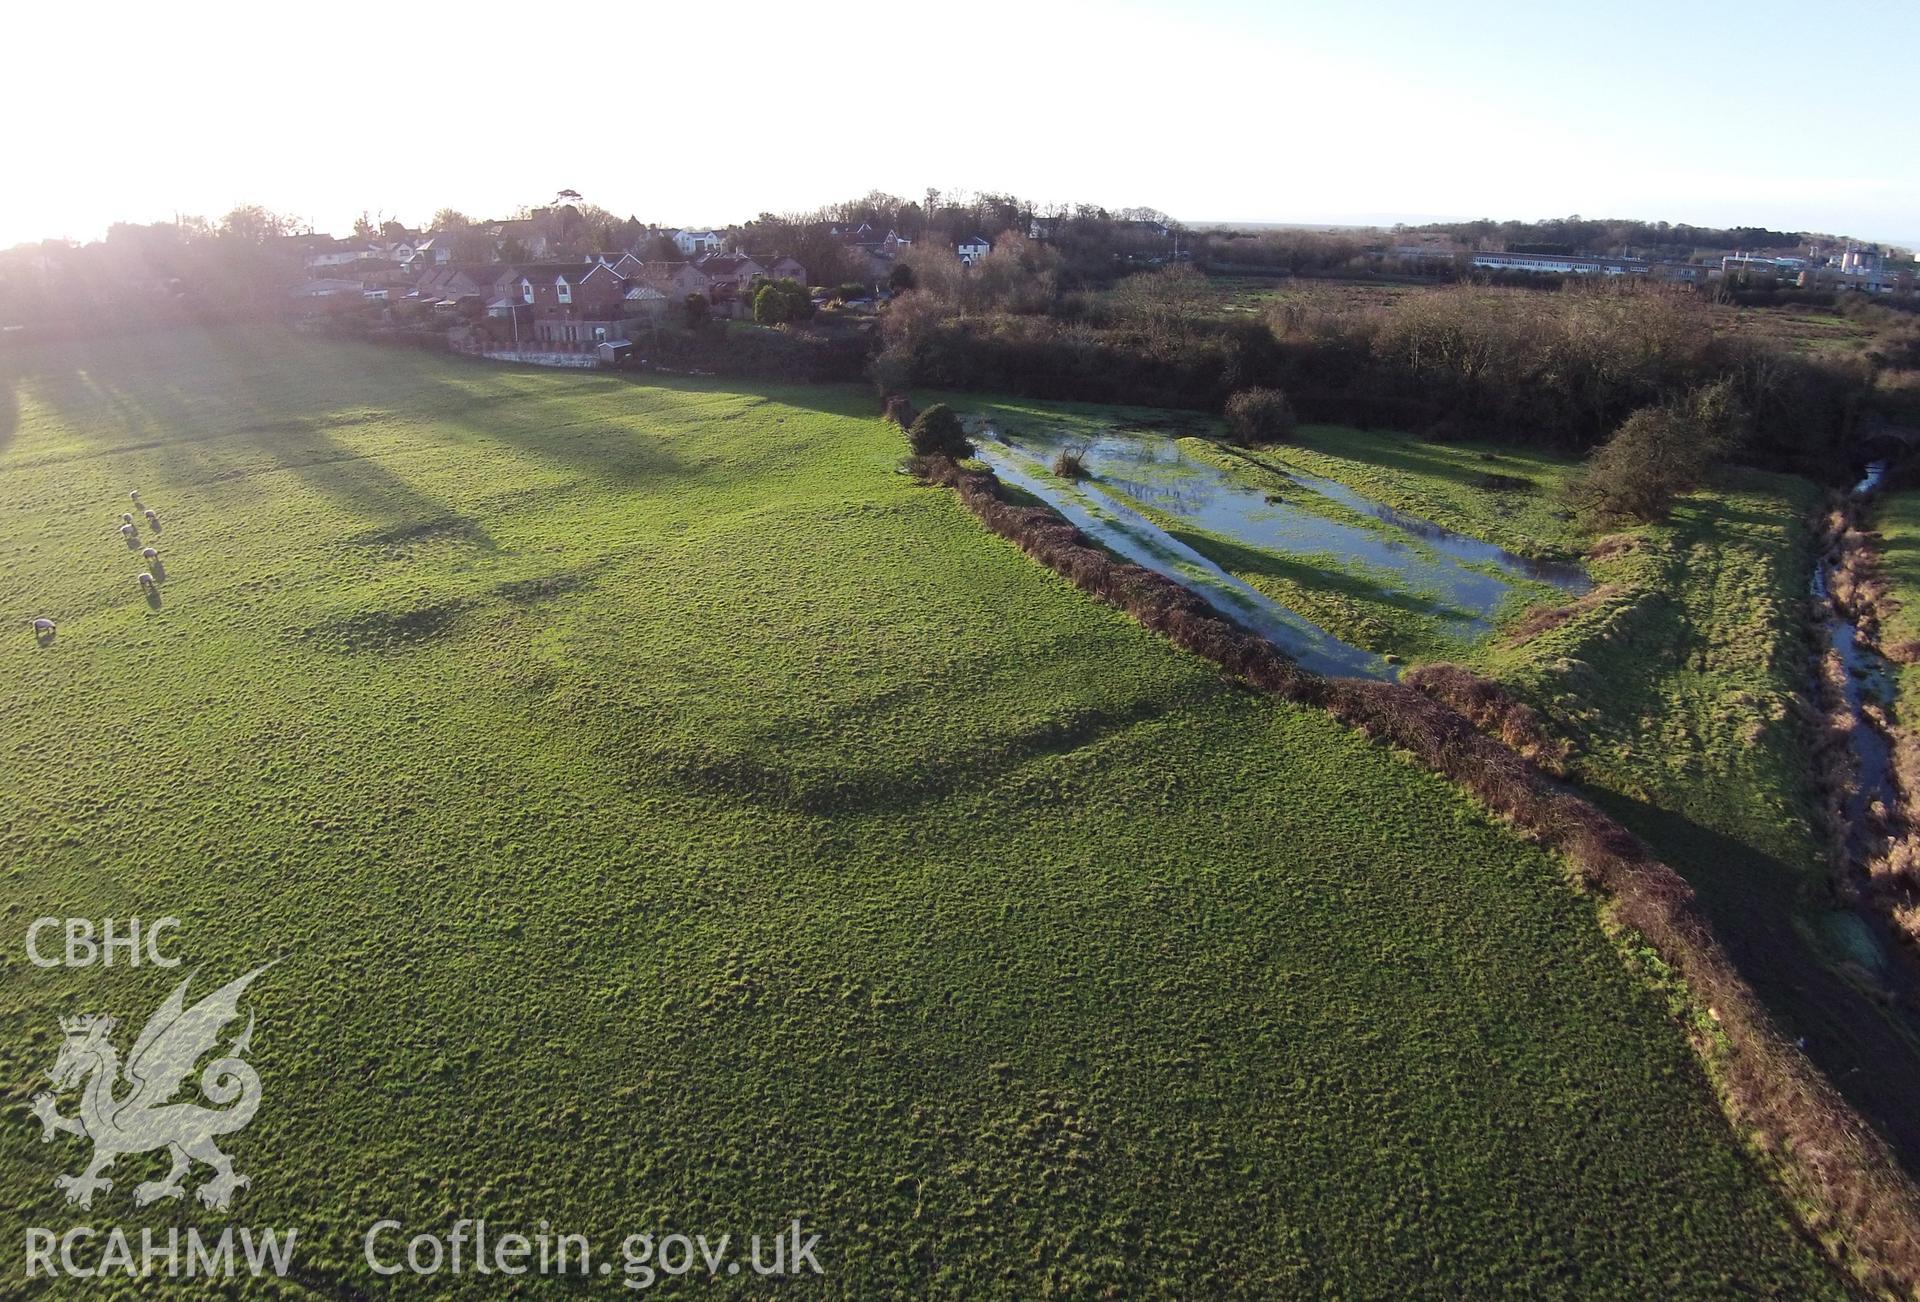 Colour photo showing Sully Moat, taken by Paul R. Davis, 29th December 2015.